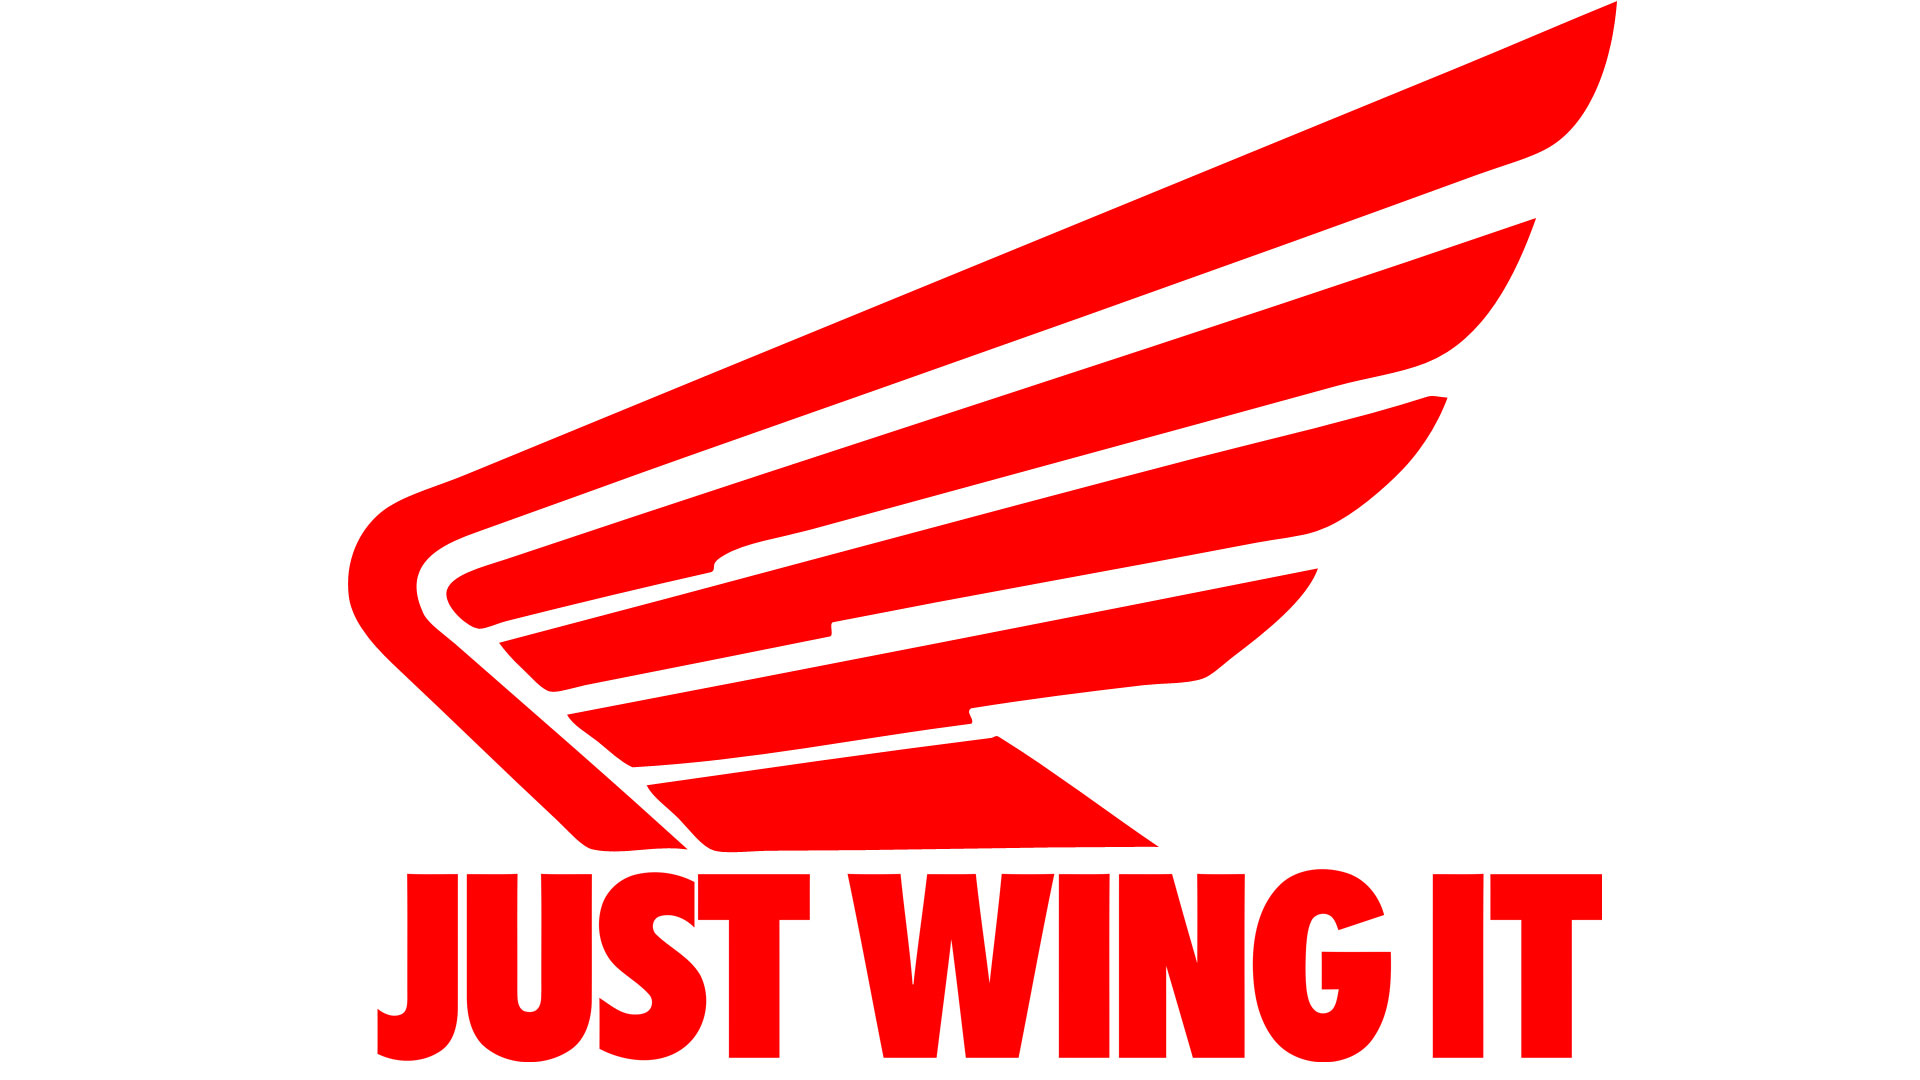 Just Wing It 2K Inspirational